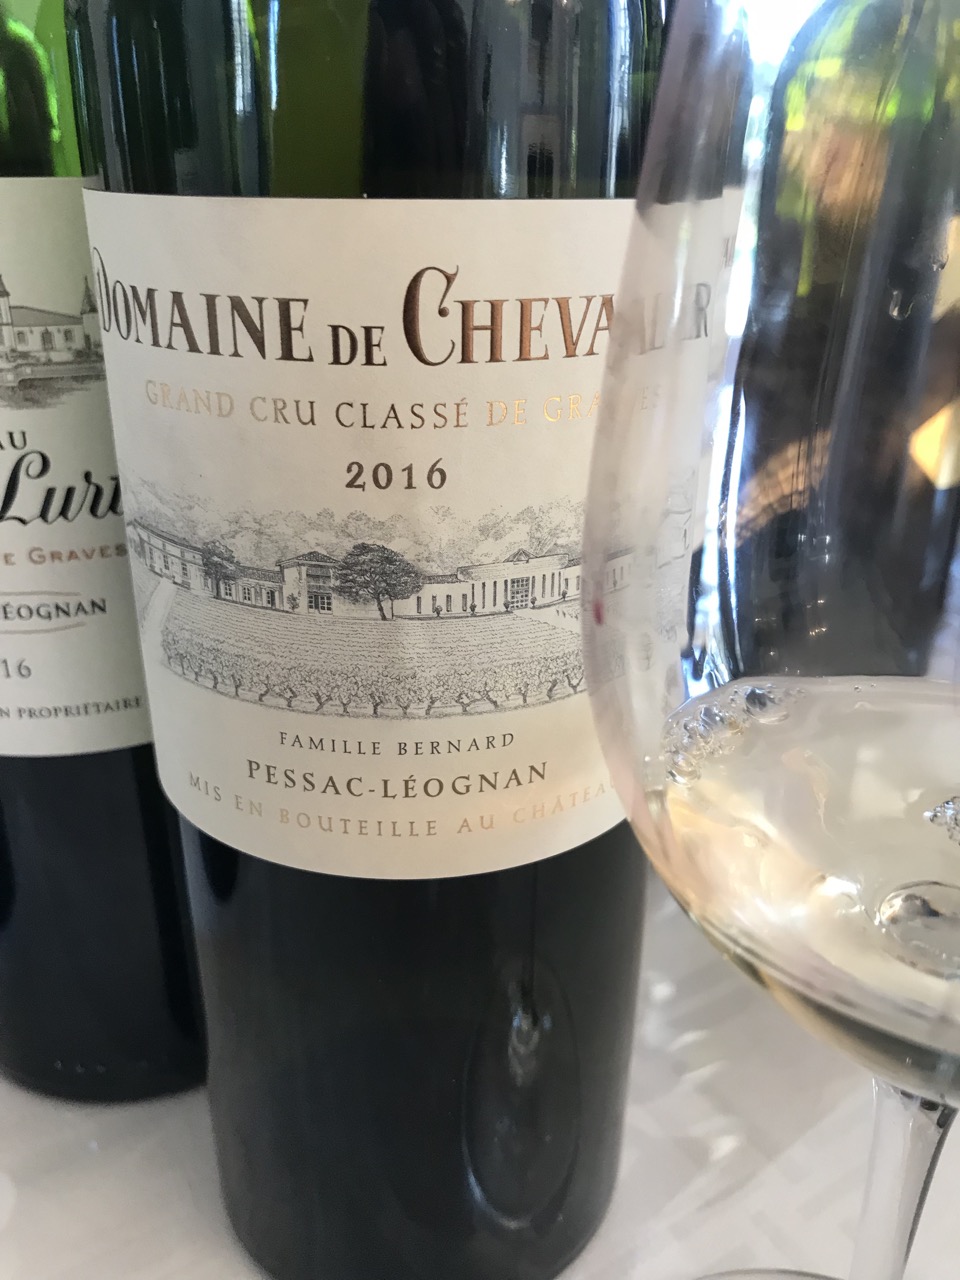 Pessac-Léognan and 2016 bottle | Wine Graves Chronicles from